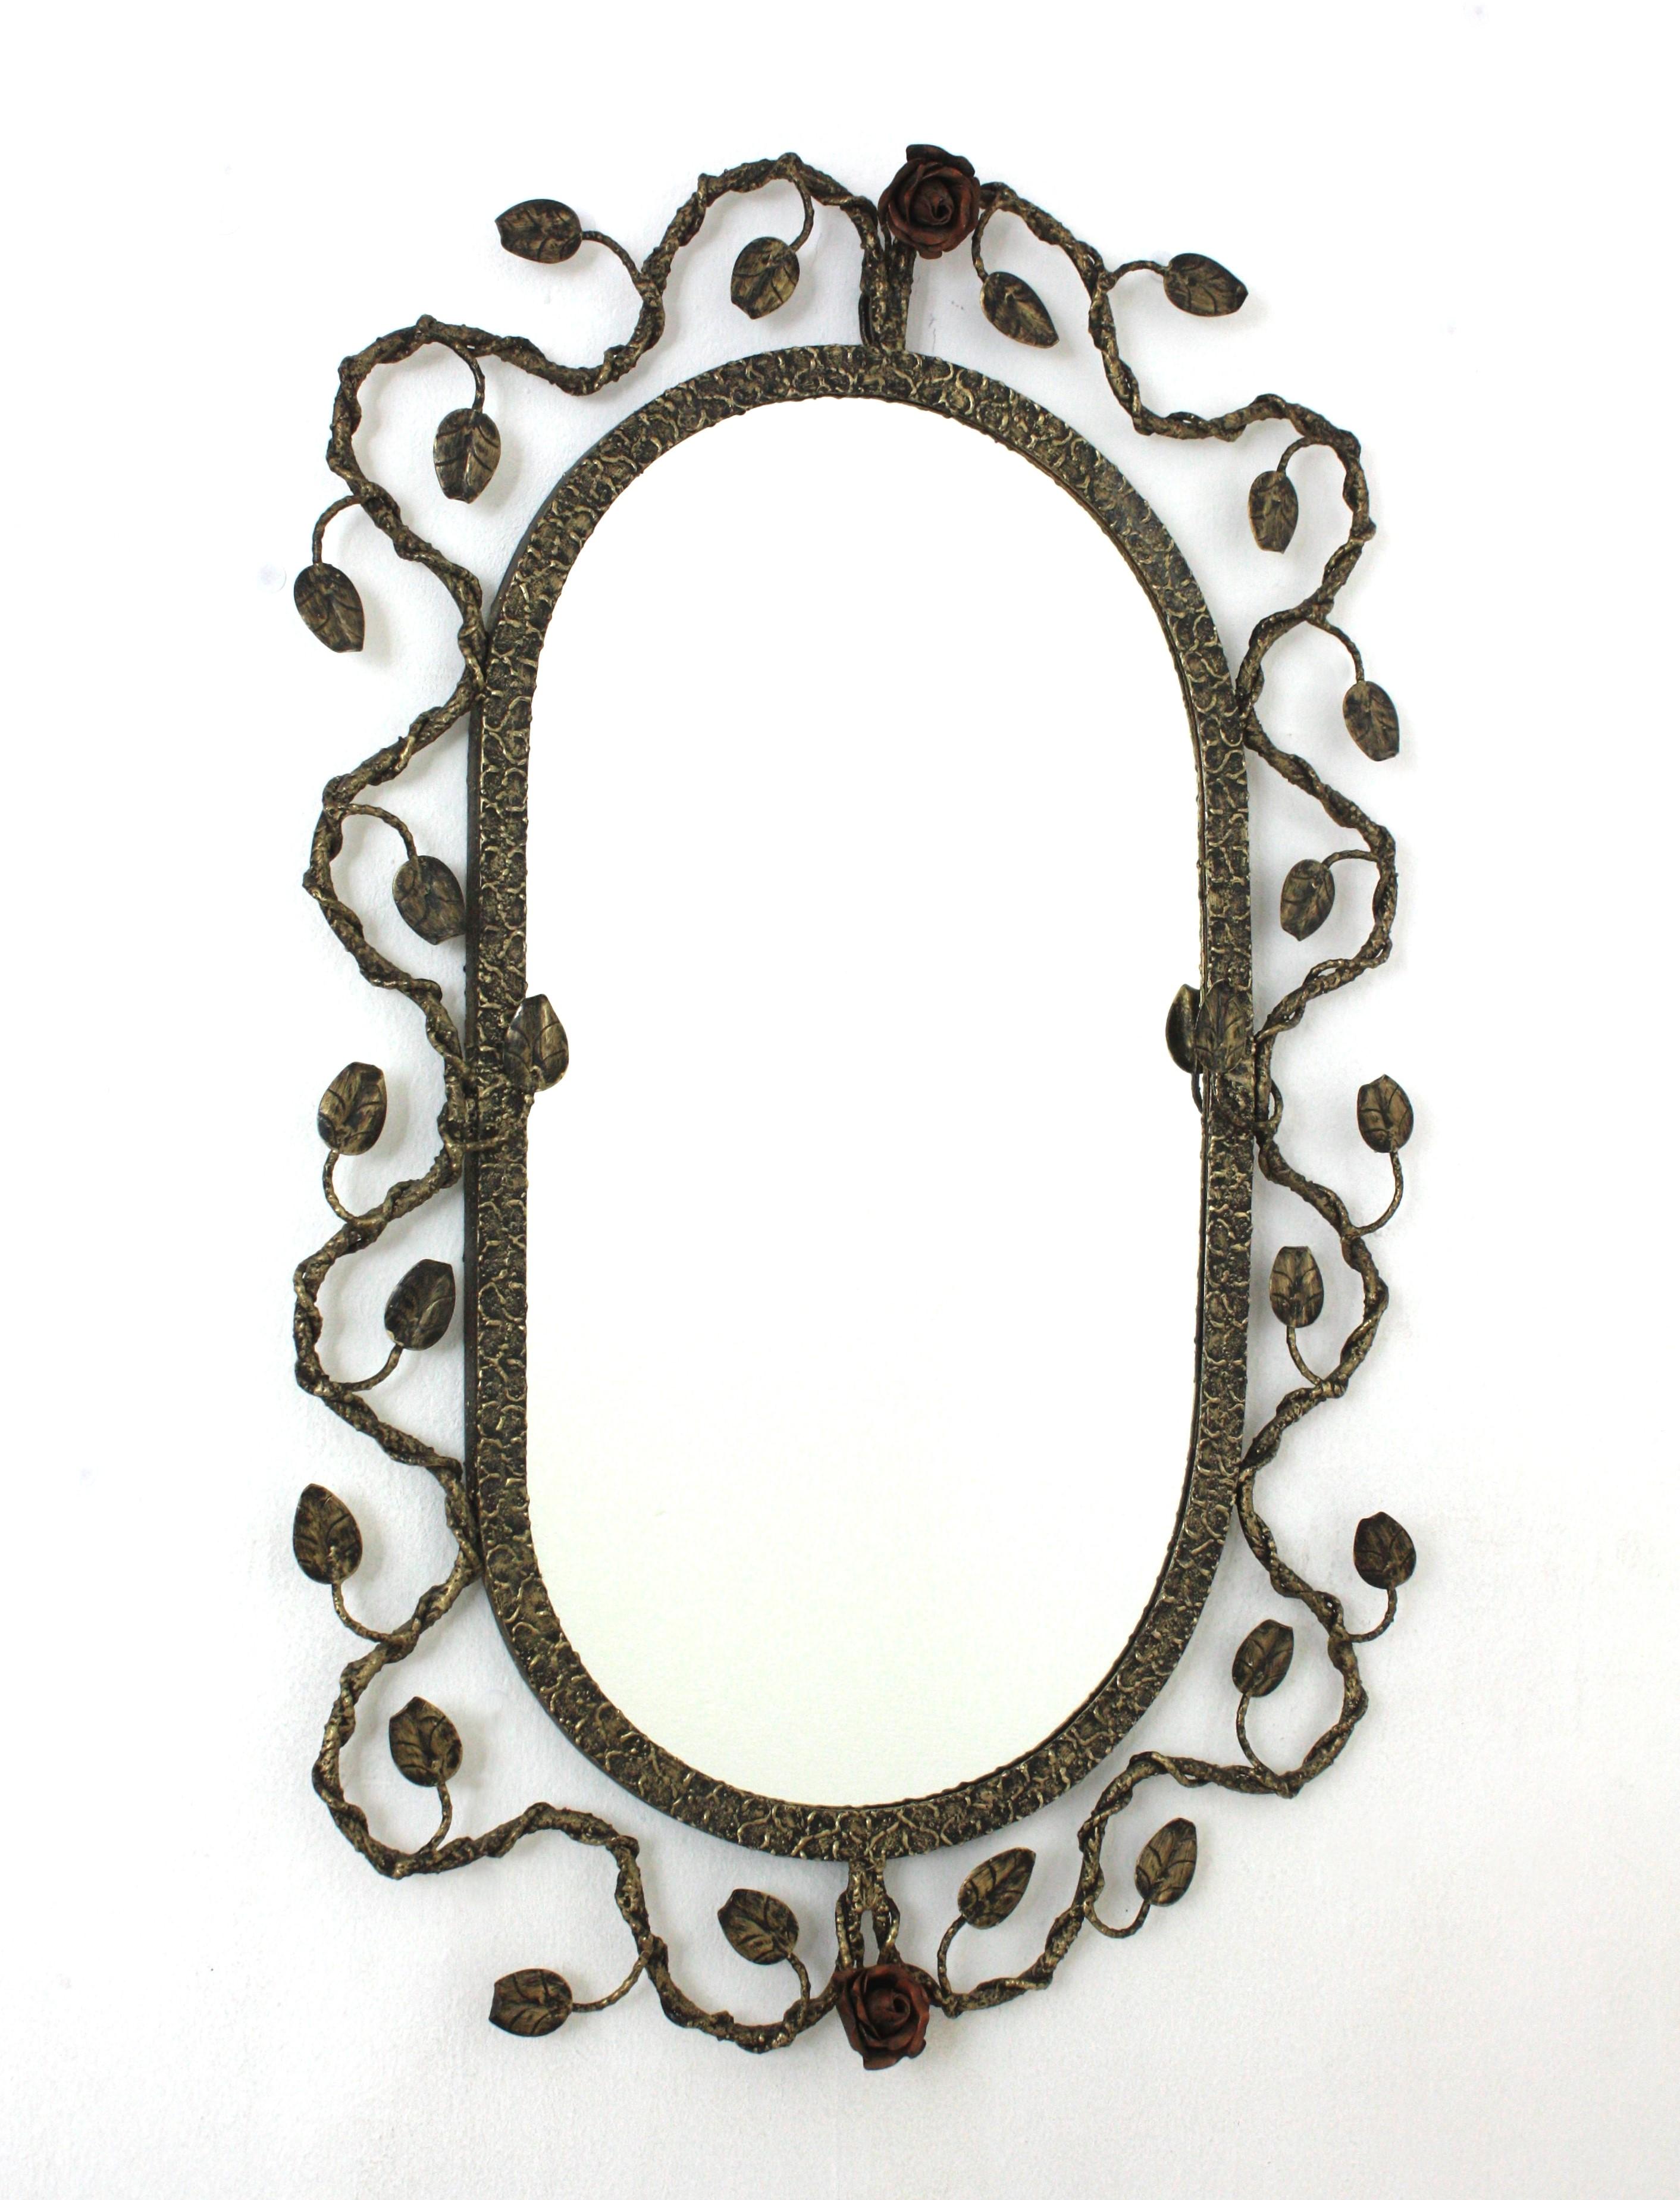 Foliage Floral Oval Mirror in Gilt Silvered Hand Forged Iron, Spain, 1950s.
Hand wrought iron oval sunburst wall mirror with foliage frame , patinated gilt-silver finish and floral accents in red patinated iron. 
The frame features and intrincate of